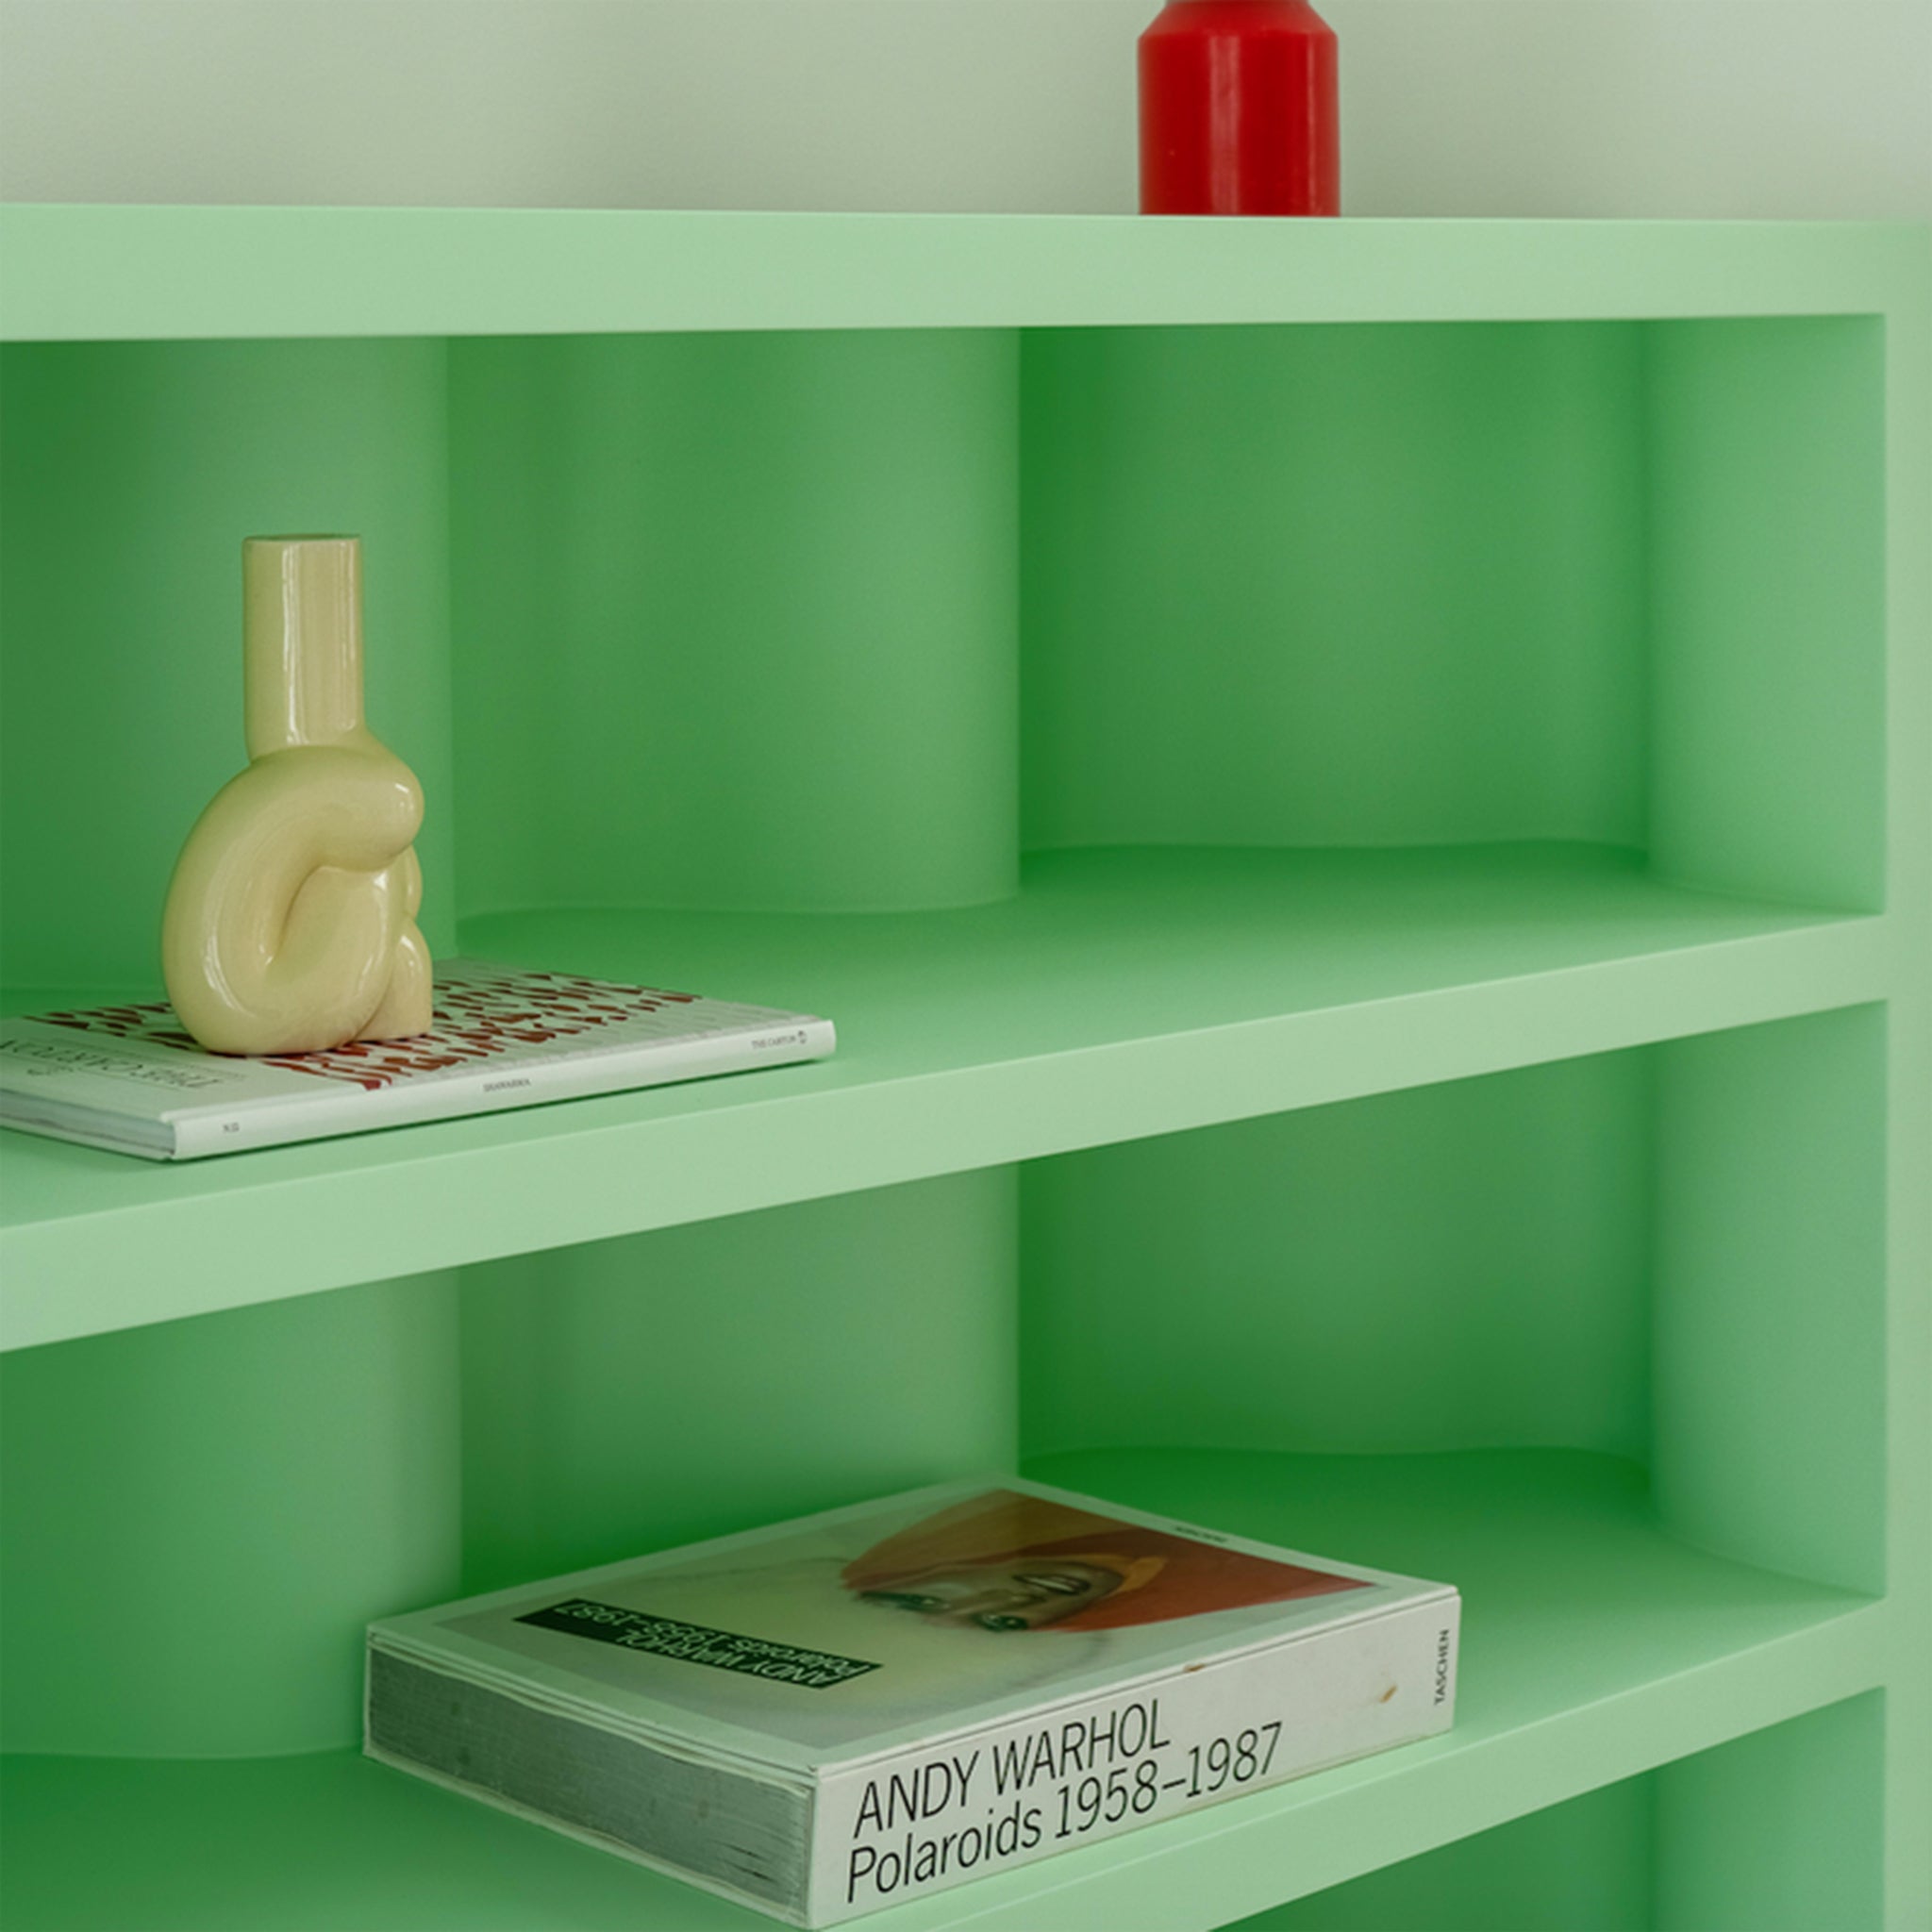 Close-up of a modern green bookcase displaying a unique ceramic sculpture, a red candle, and an Andy Warhol book.